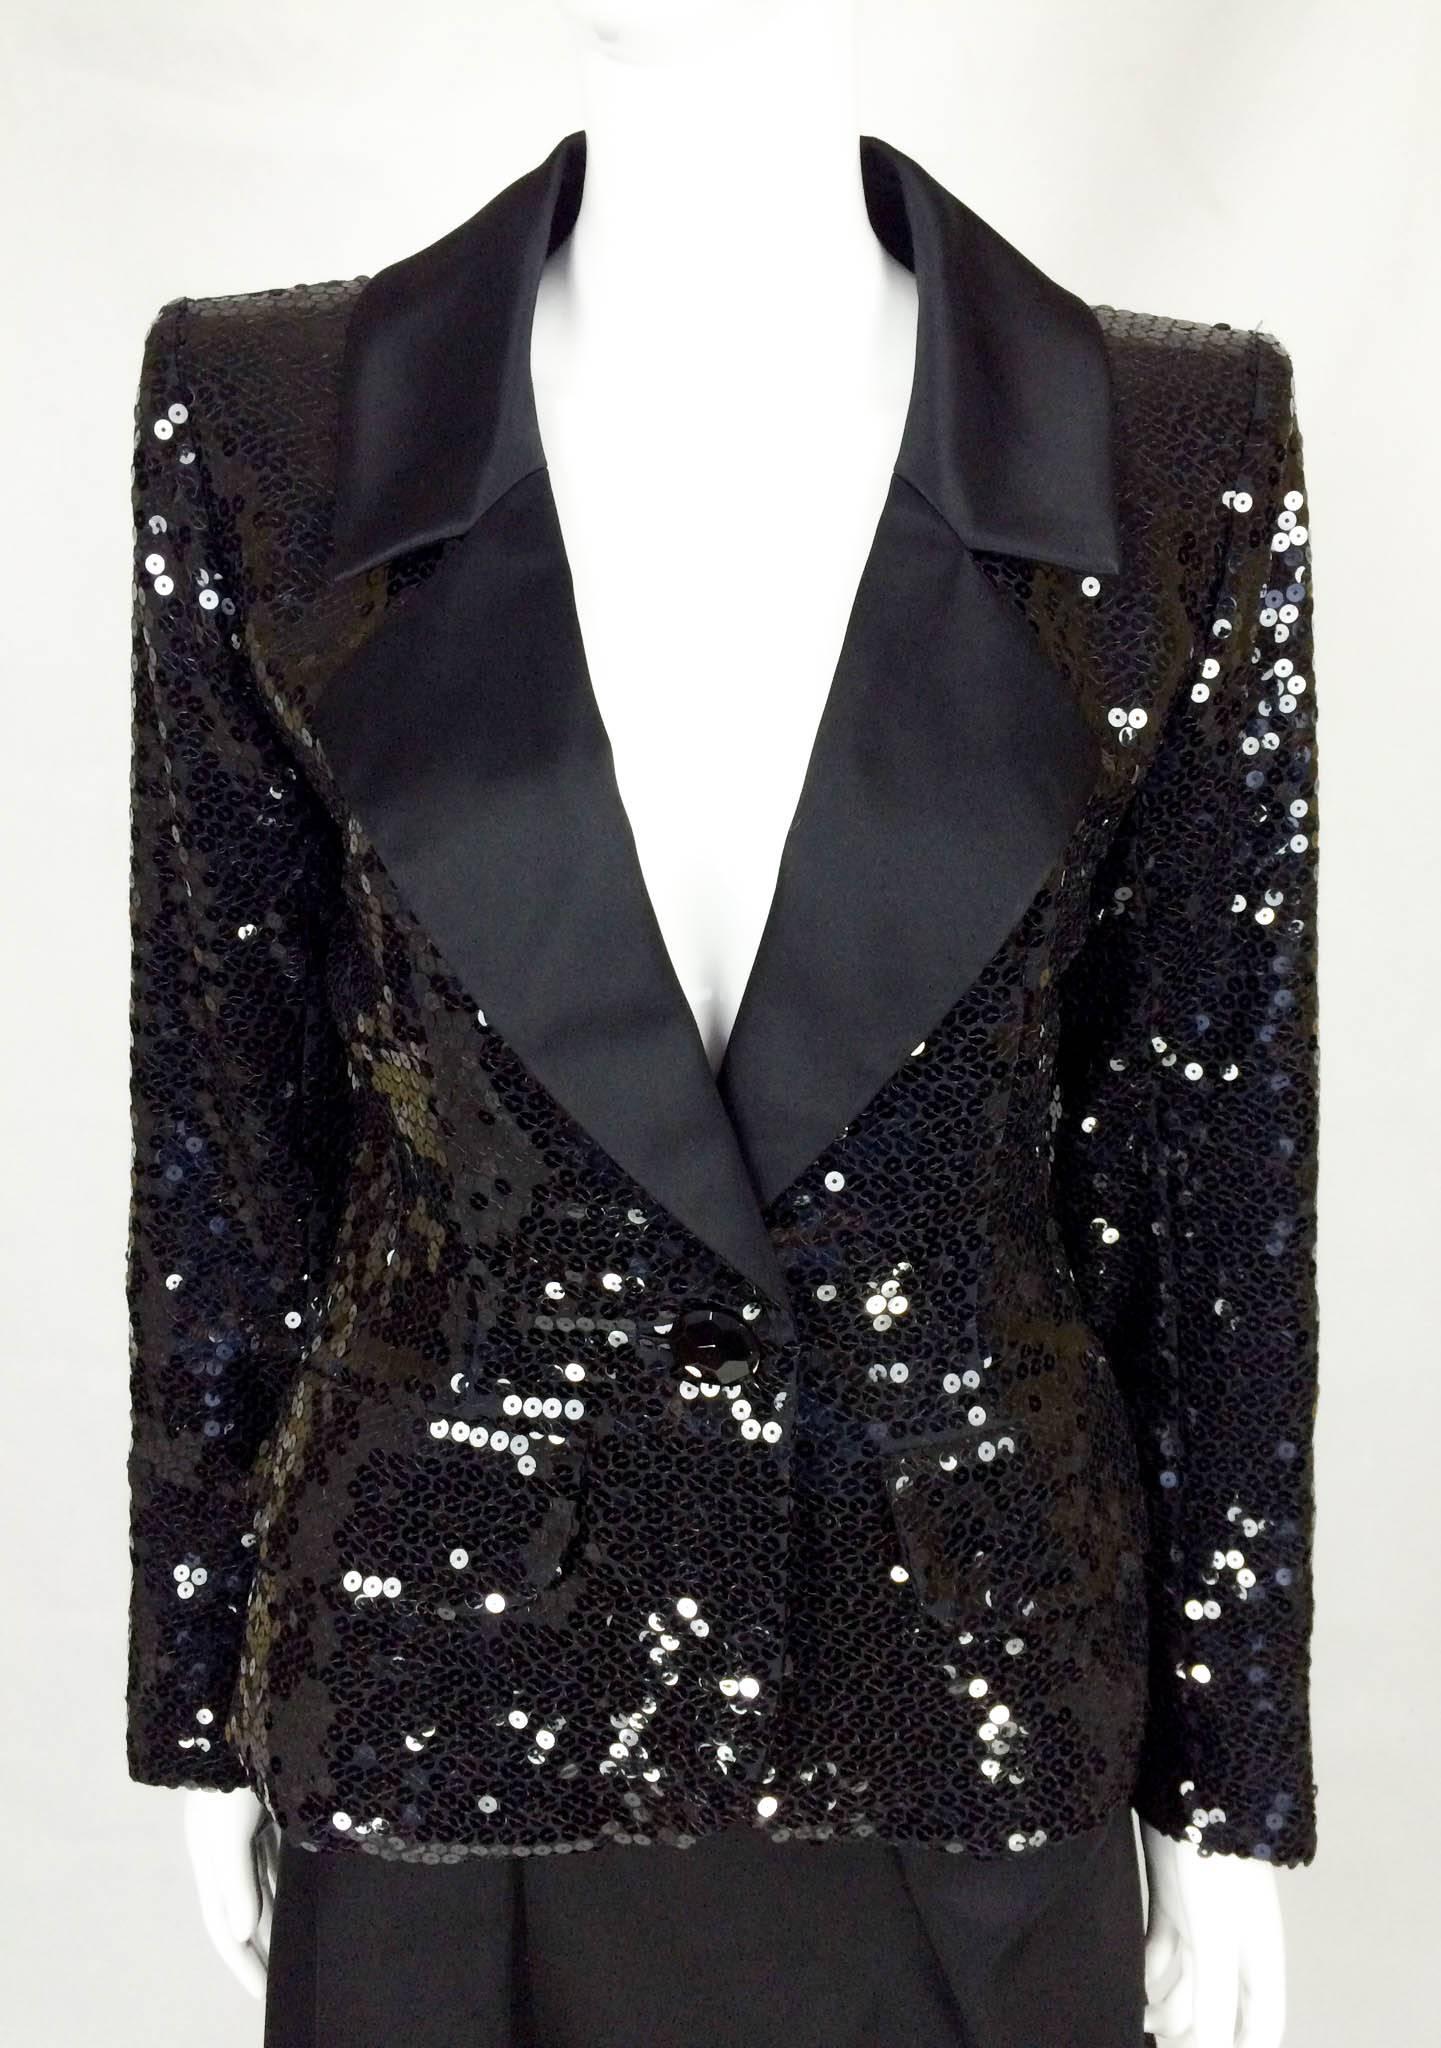 Yves Saint Laurent Le Smoking Sequin Jacket, Long and Short Satin Skirts - 1980 In Excellent Condition For Sale In London, Chelsea